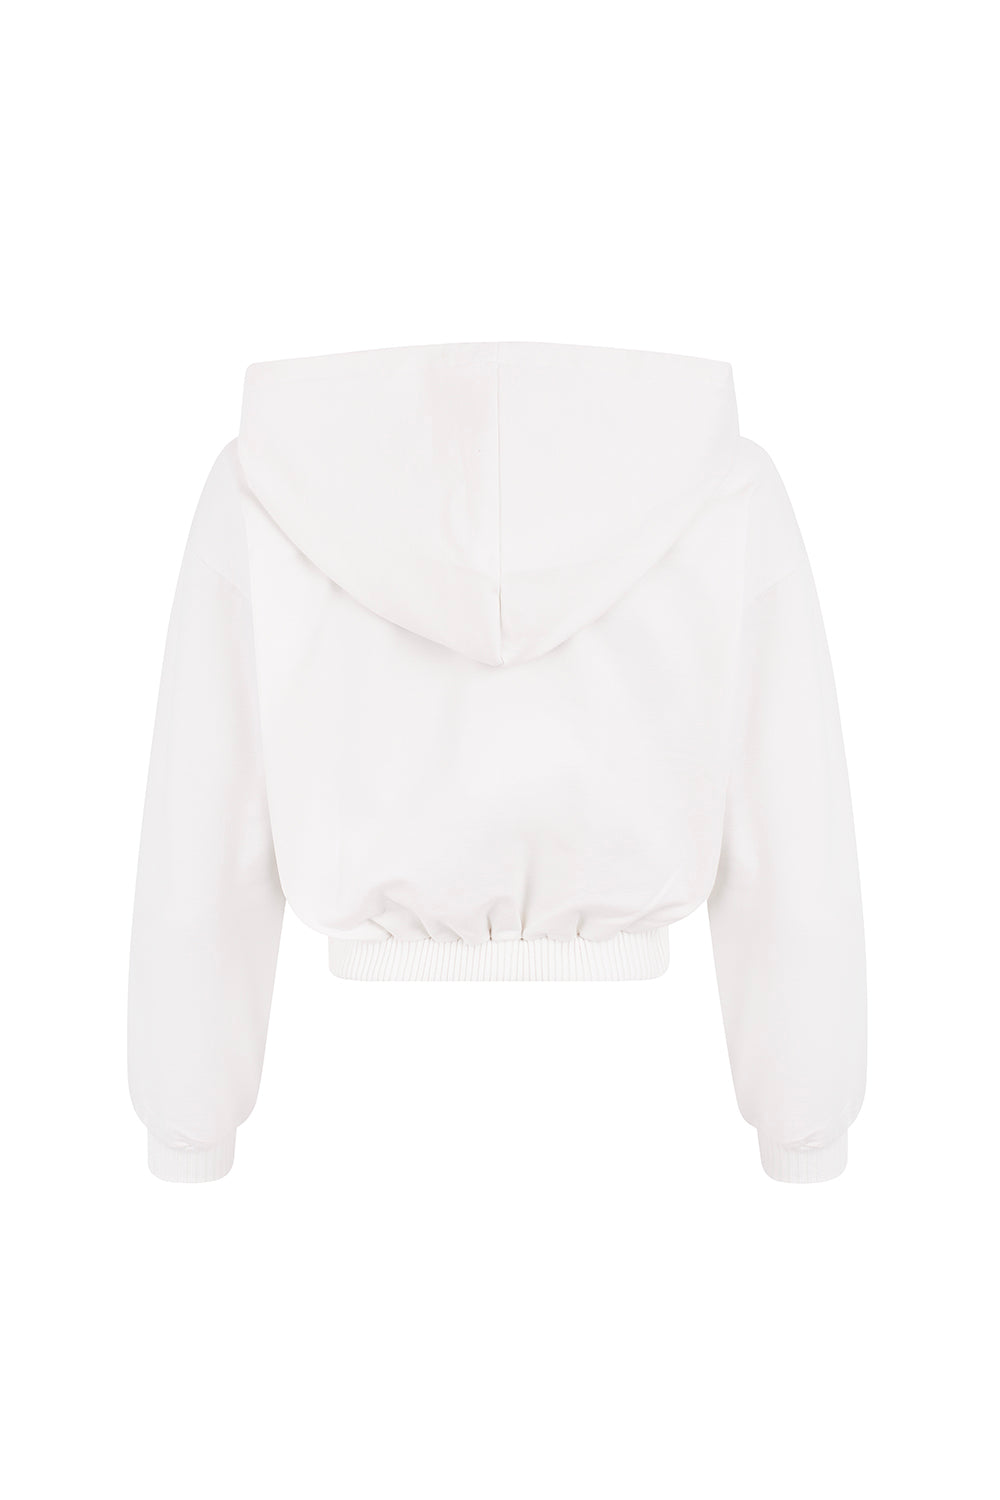 WHITE HOODIE TRACKSUIT SWEATER